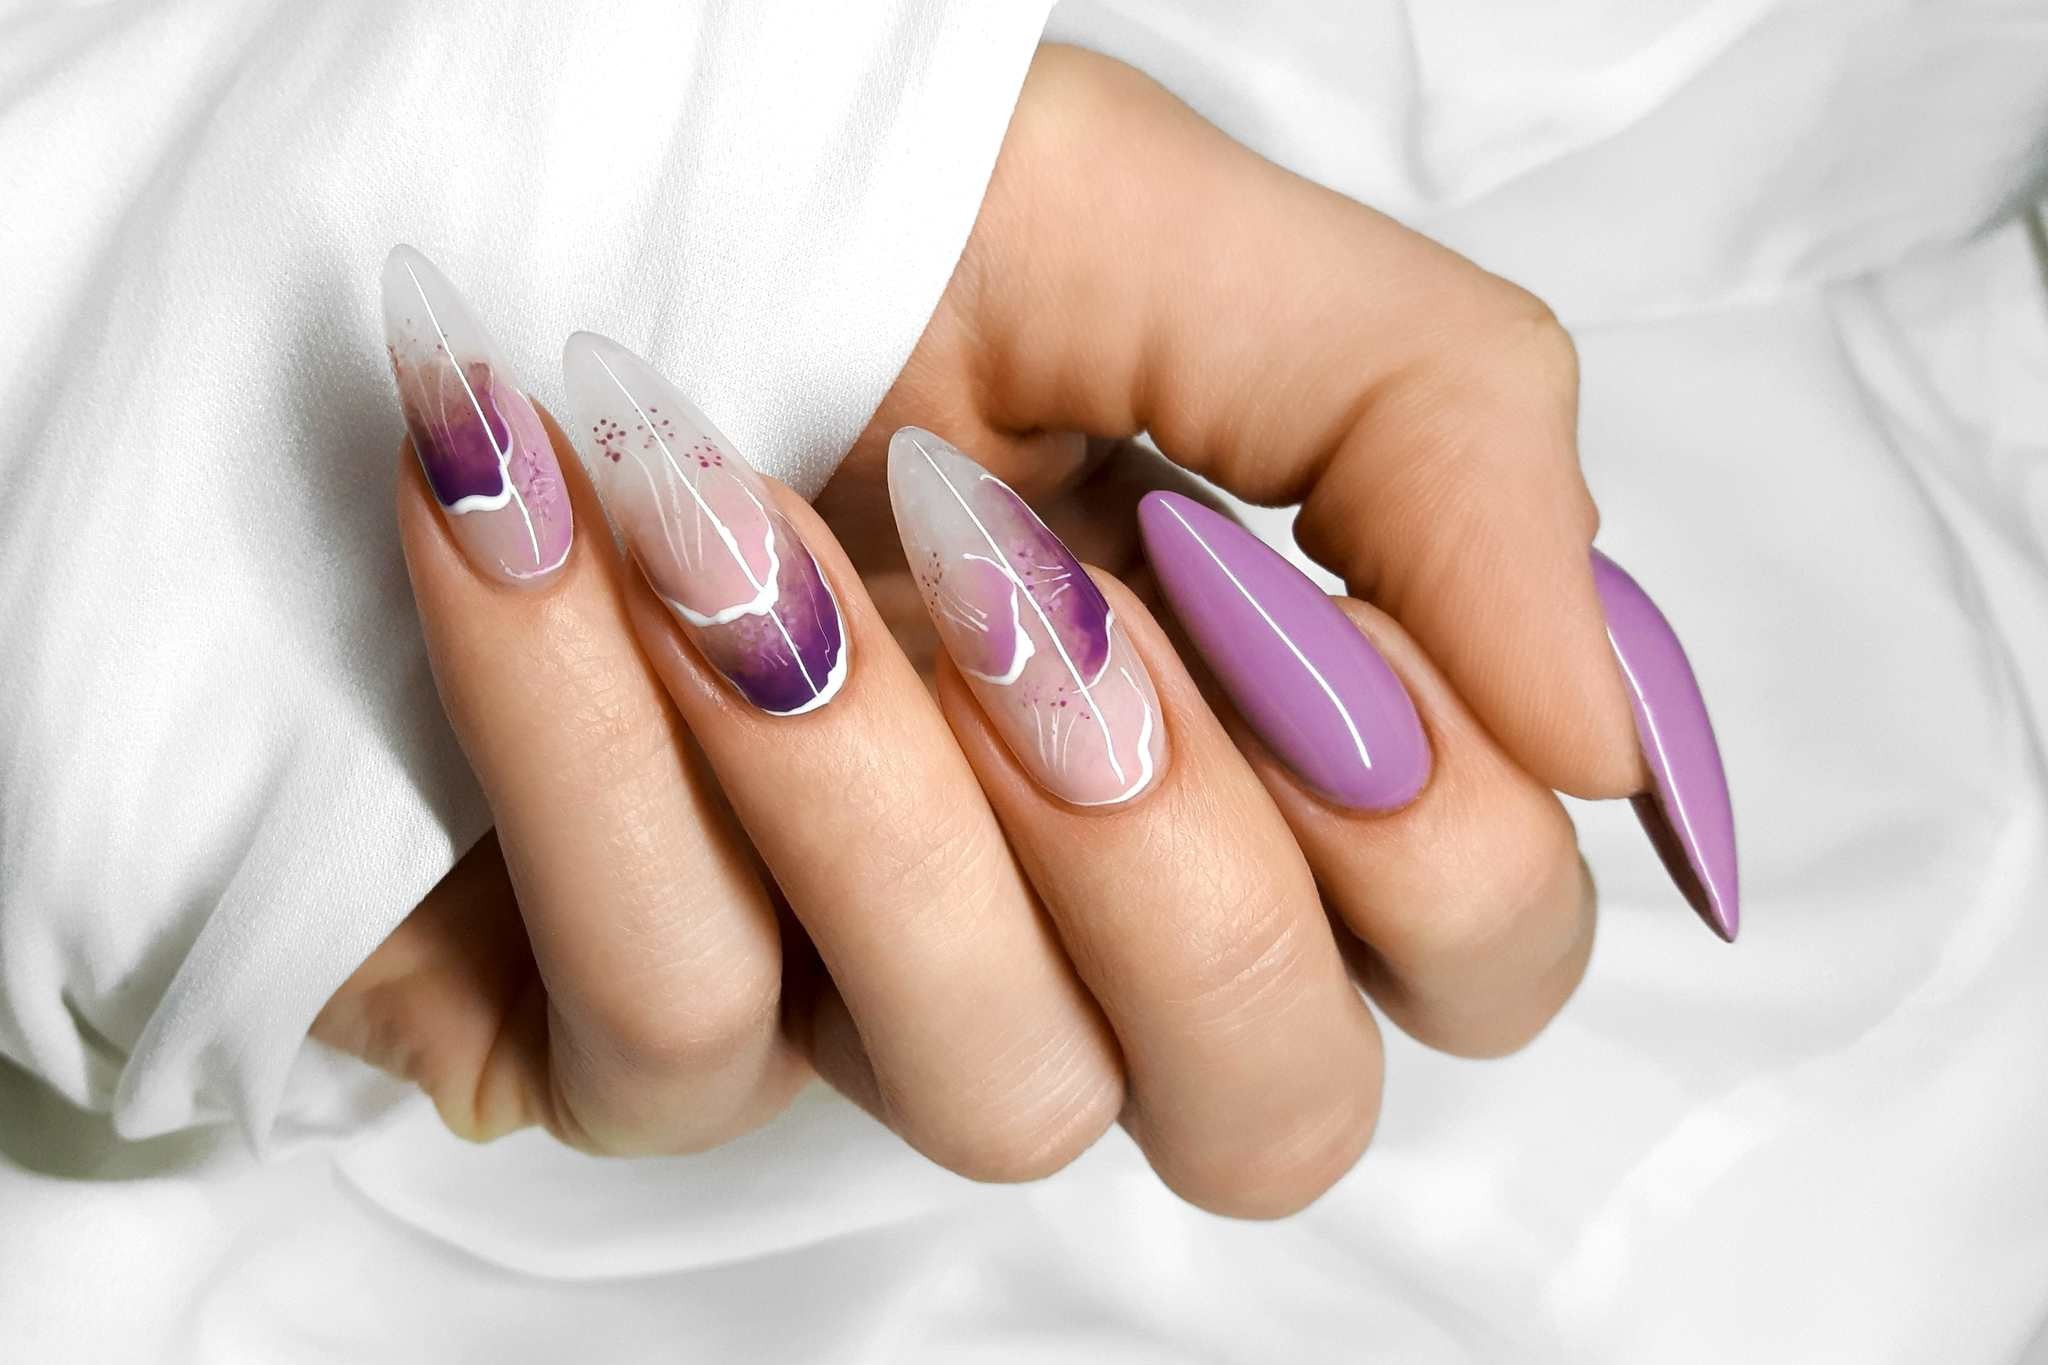 How to Make Your Fingernails Look Good Naturally